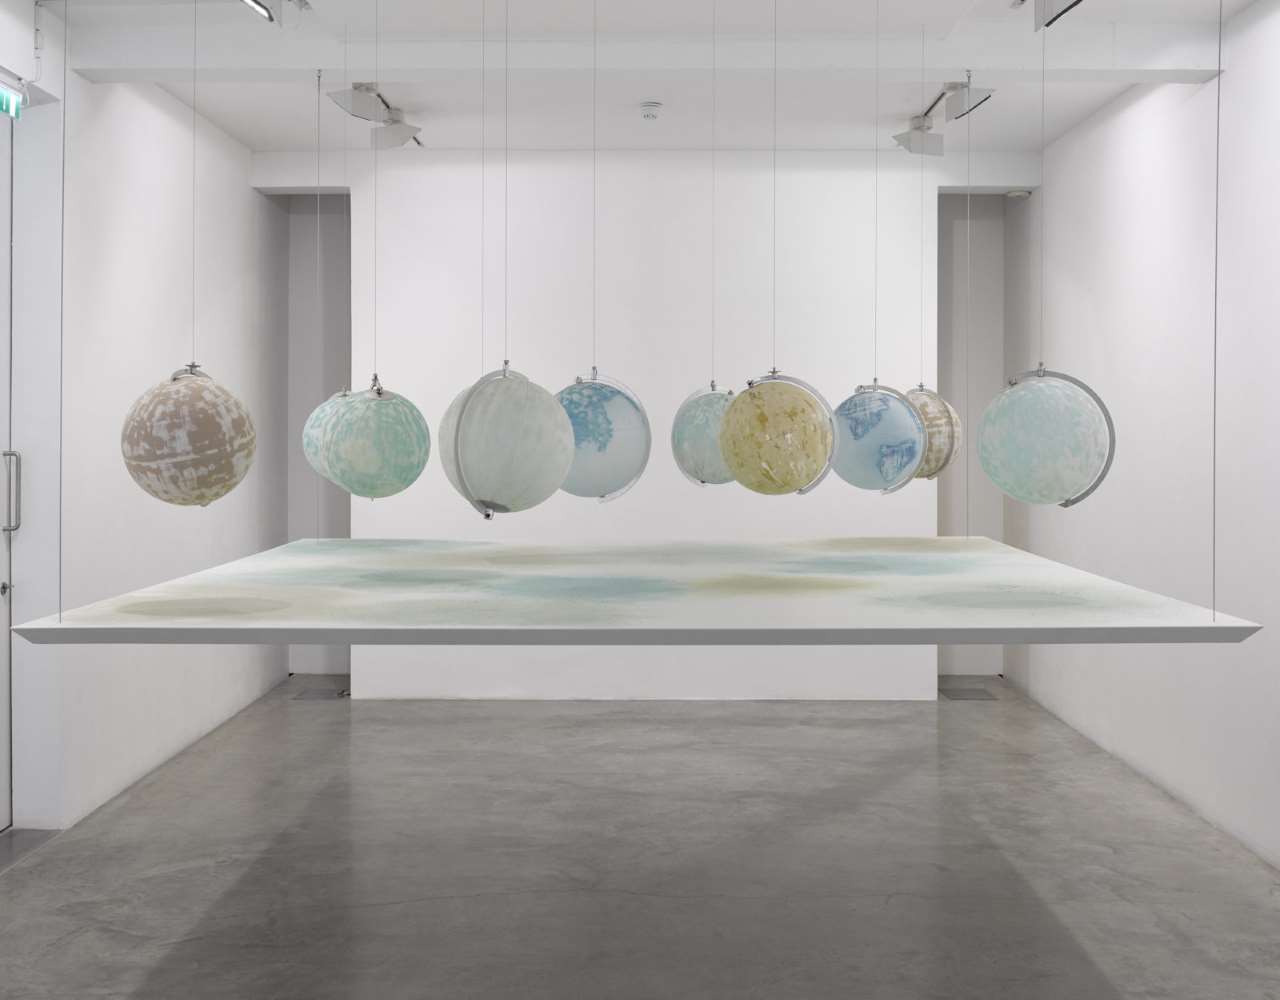 Julian Charrière, We Are All Astronauts, 2013. 11 found globes made of glass, plastic and paper, abraded with international mineral sandpaper, suspended table top, dust from globes’surfaces. Courtesy the artist; DITTRICH &amp; SCHLECHTRIEM, Berlin; Galerie Tschudi, Zuoz; Sean Kelly, New York; Sies+Höke, Düsseldorf.